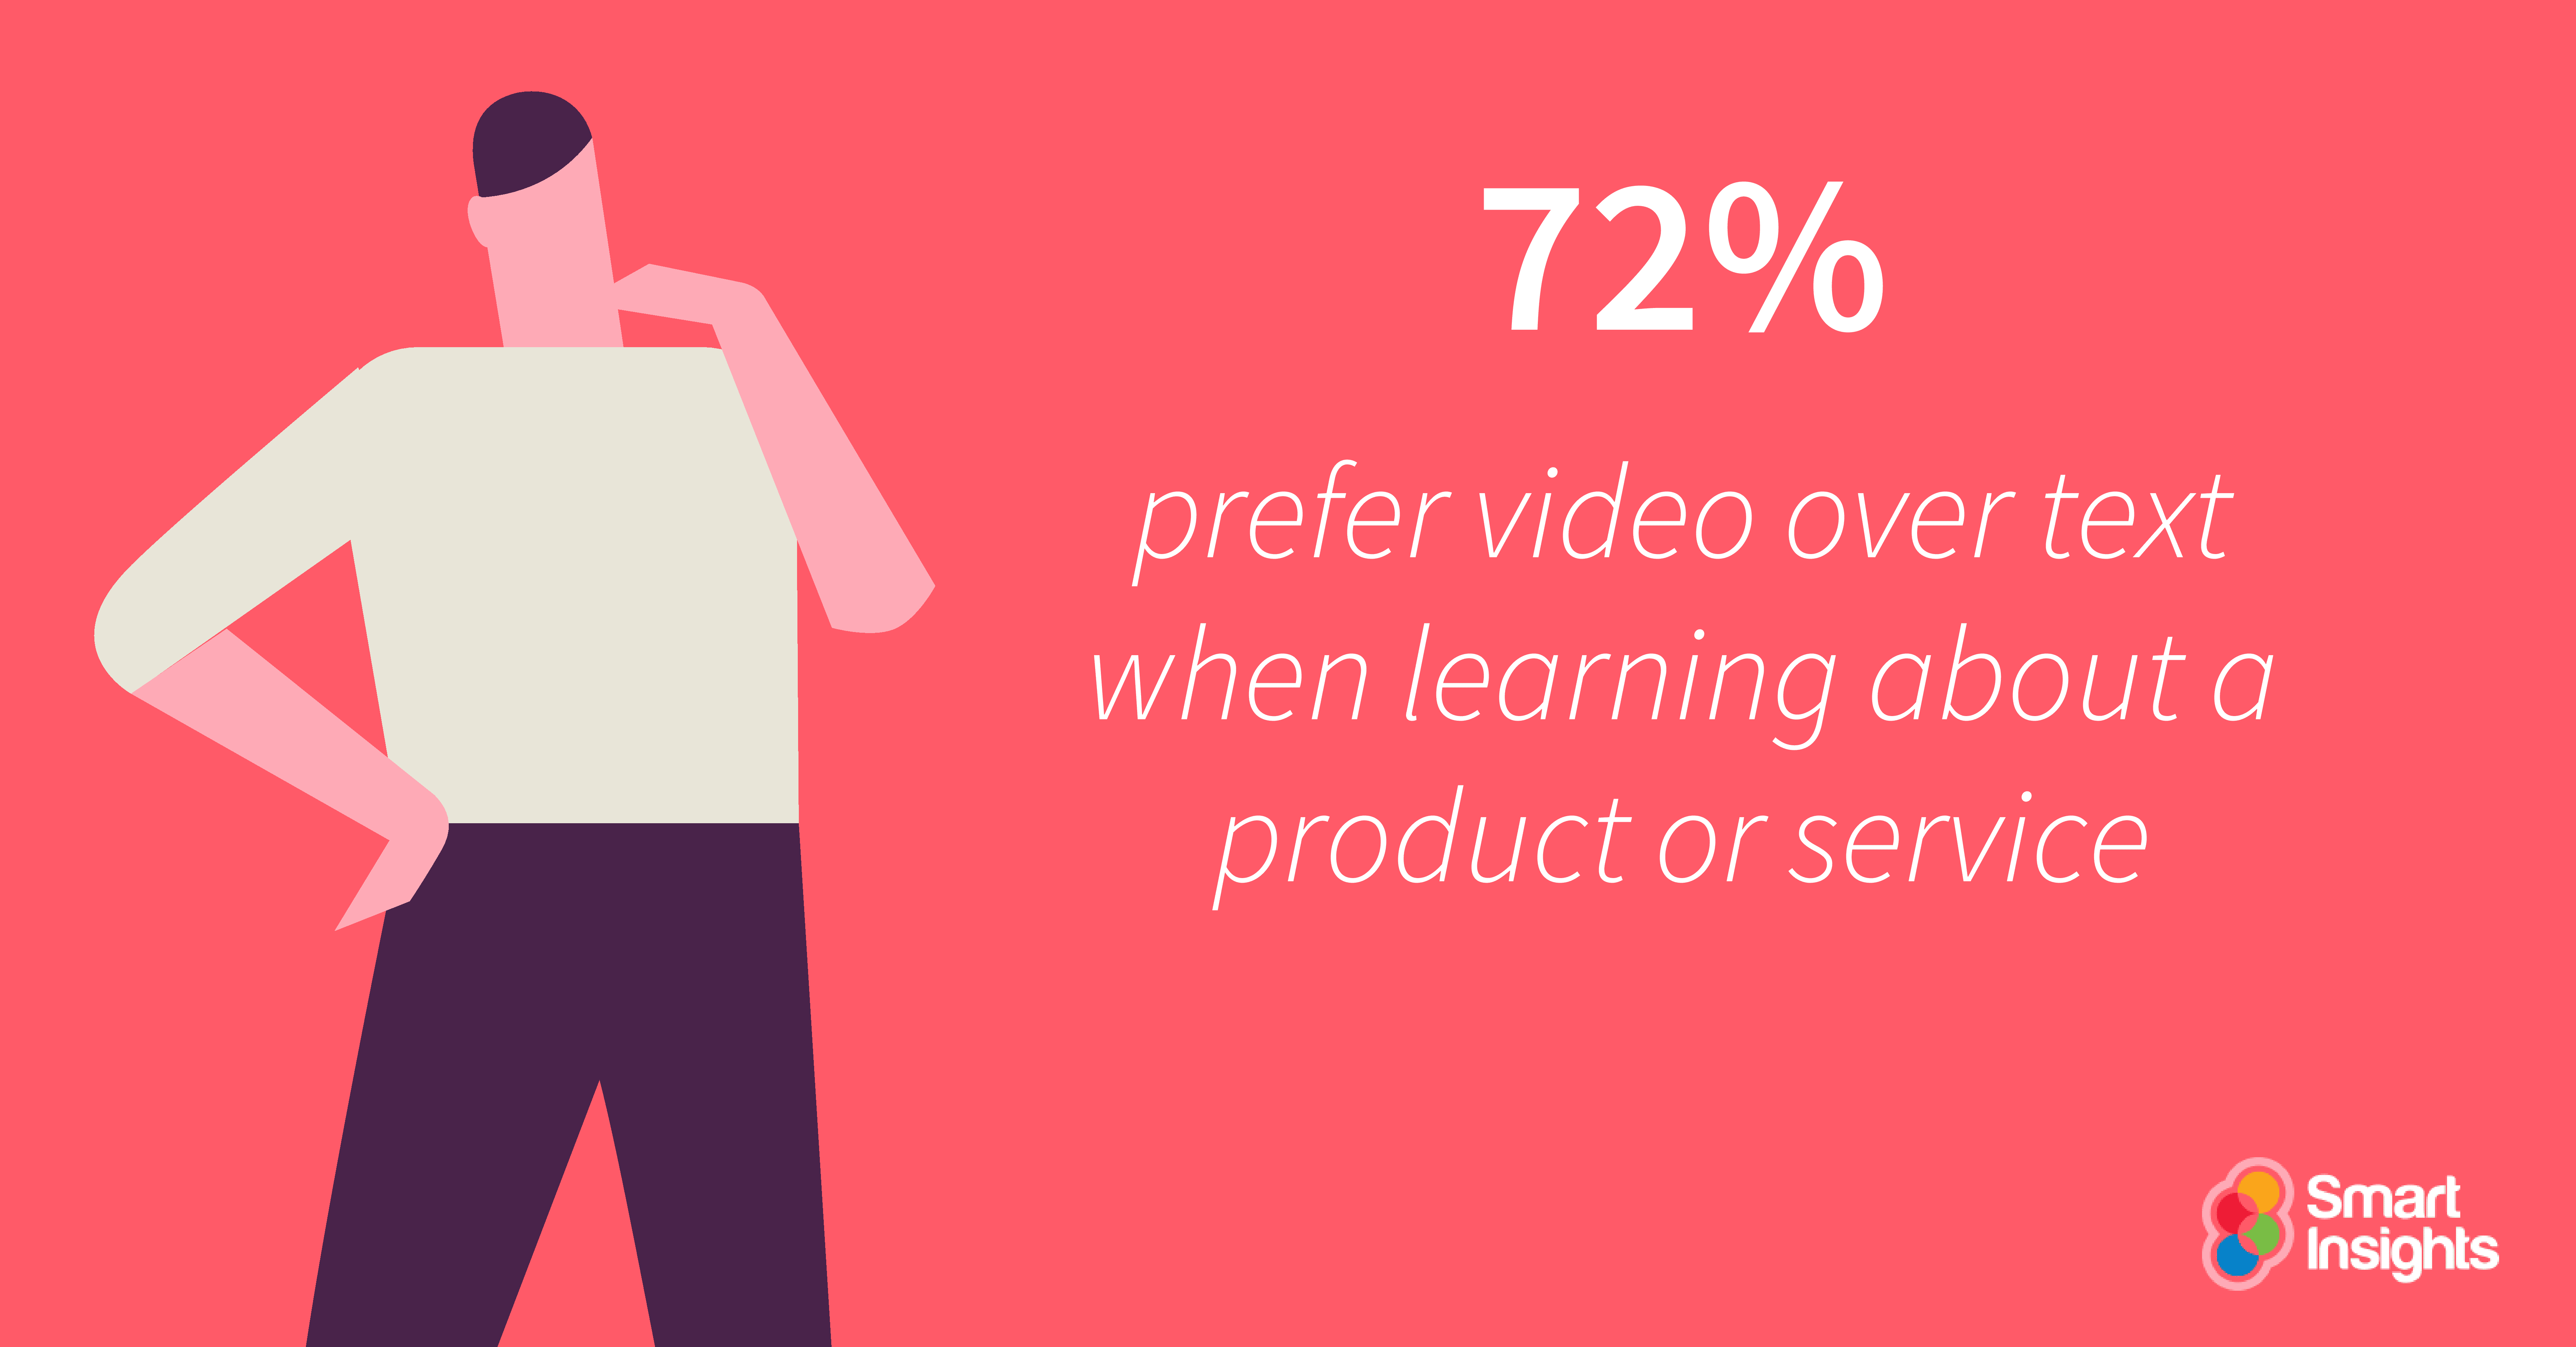 72% prefer video over text when learning about a product or service